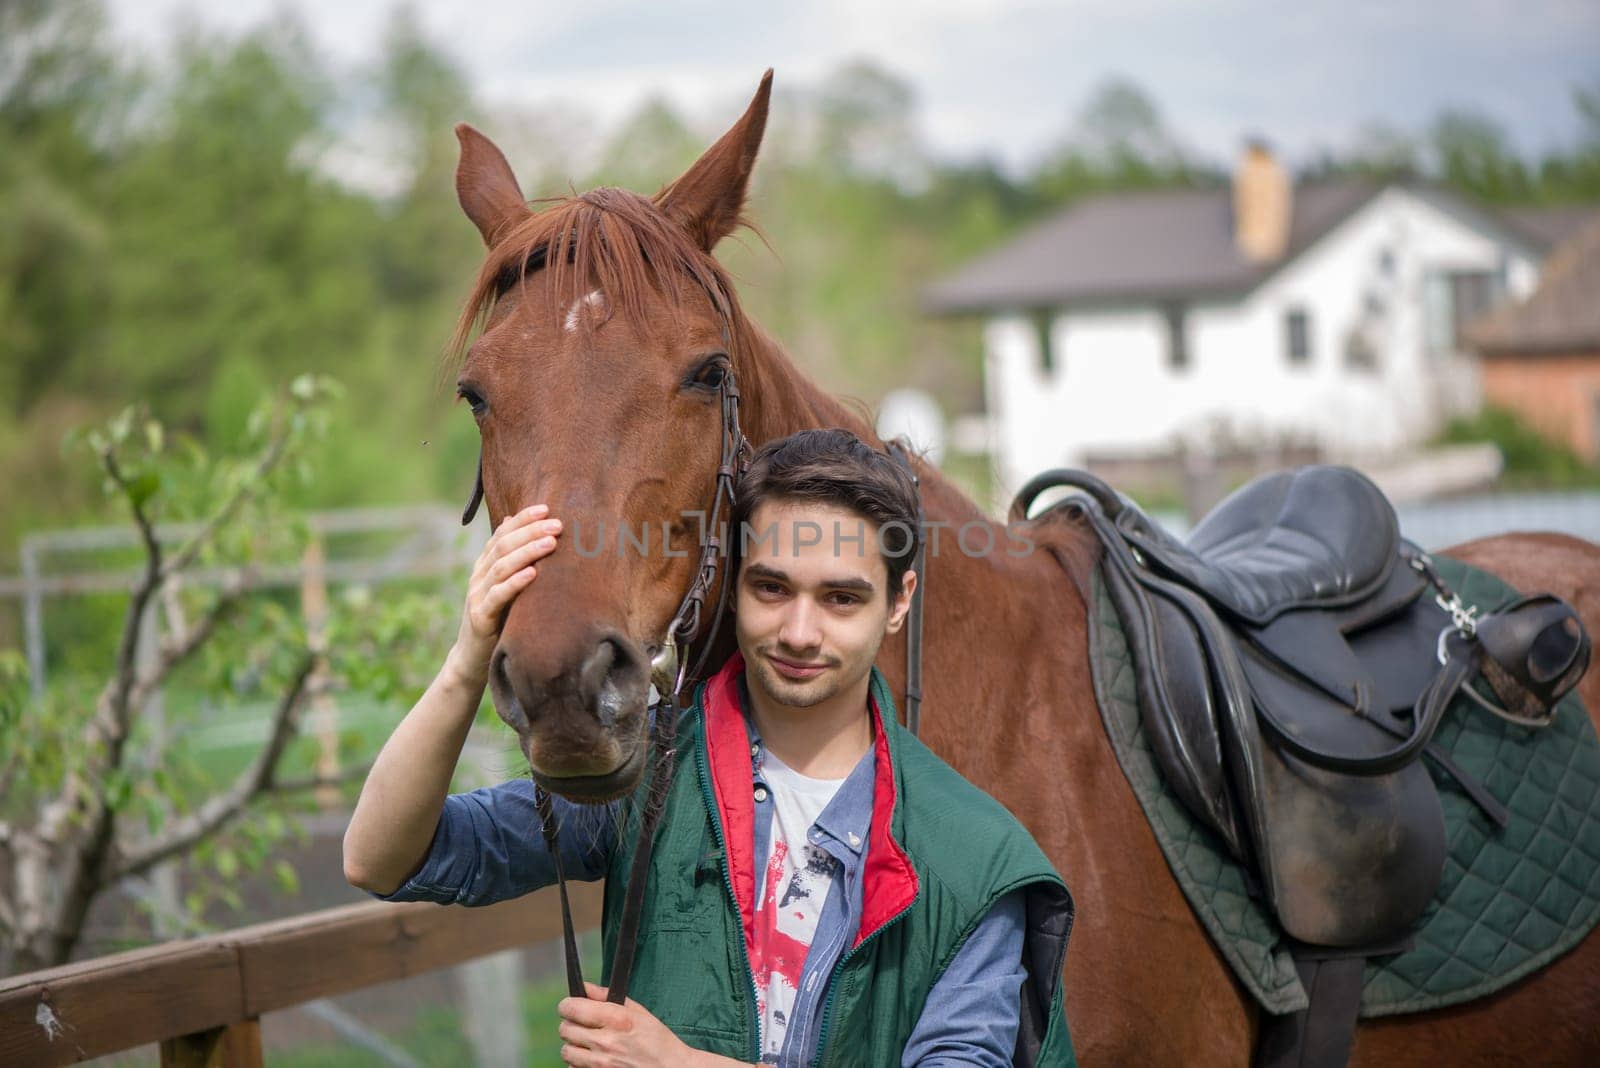 Young boy during the high mounting walking meets a young horse and communicates with it, wild nature, people and animals friendship concept, lifestyle summer outdoor by aprilphoto